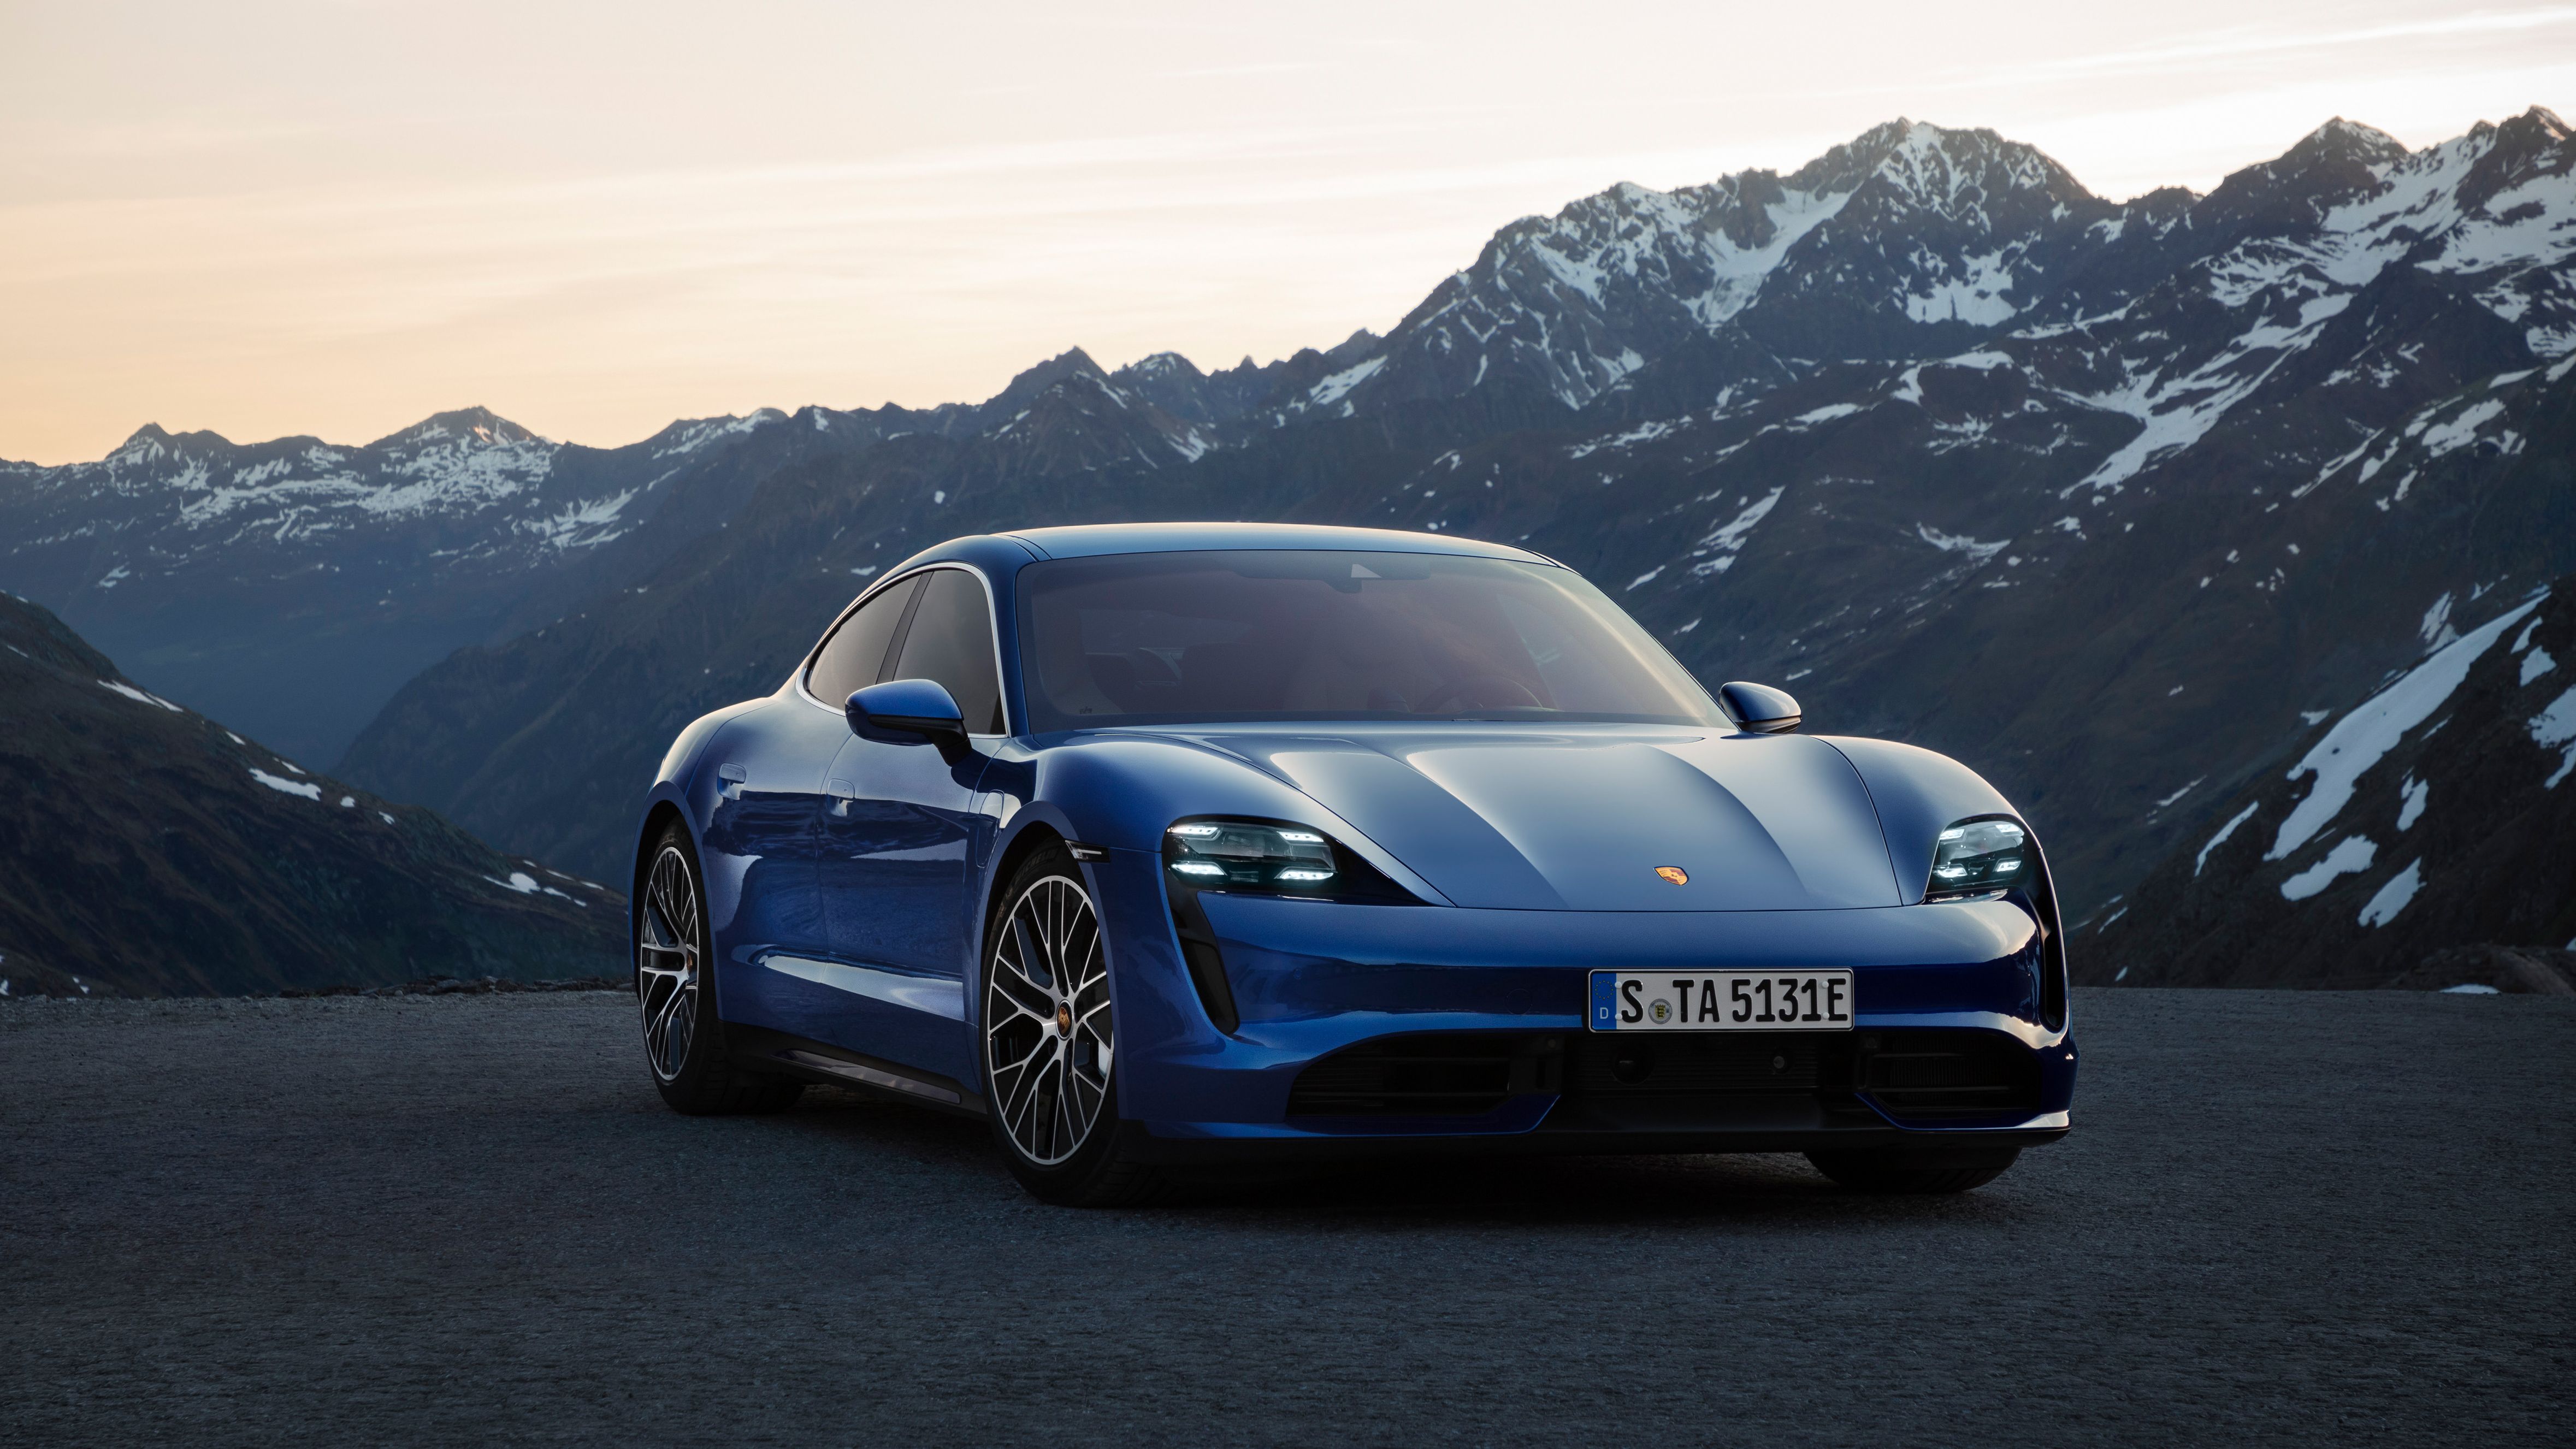 2020 - 2021 Now That the 2020 Porsche Taycan Turbo and Turbo S Are Here, What's Next for Porsche's First EV?